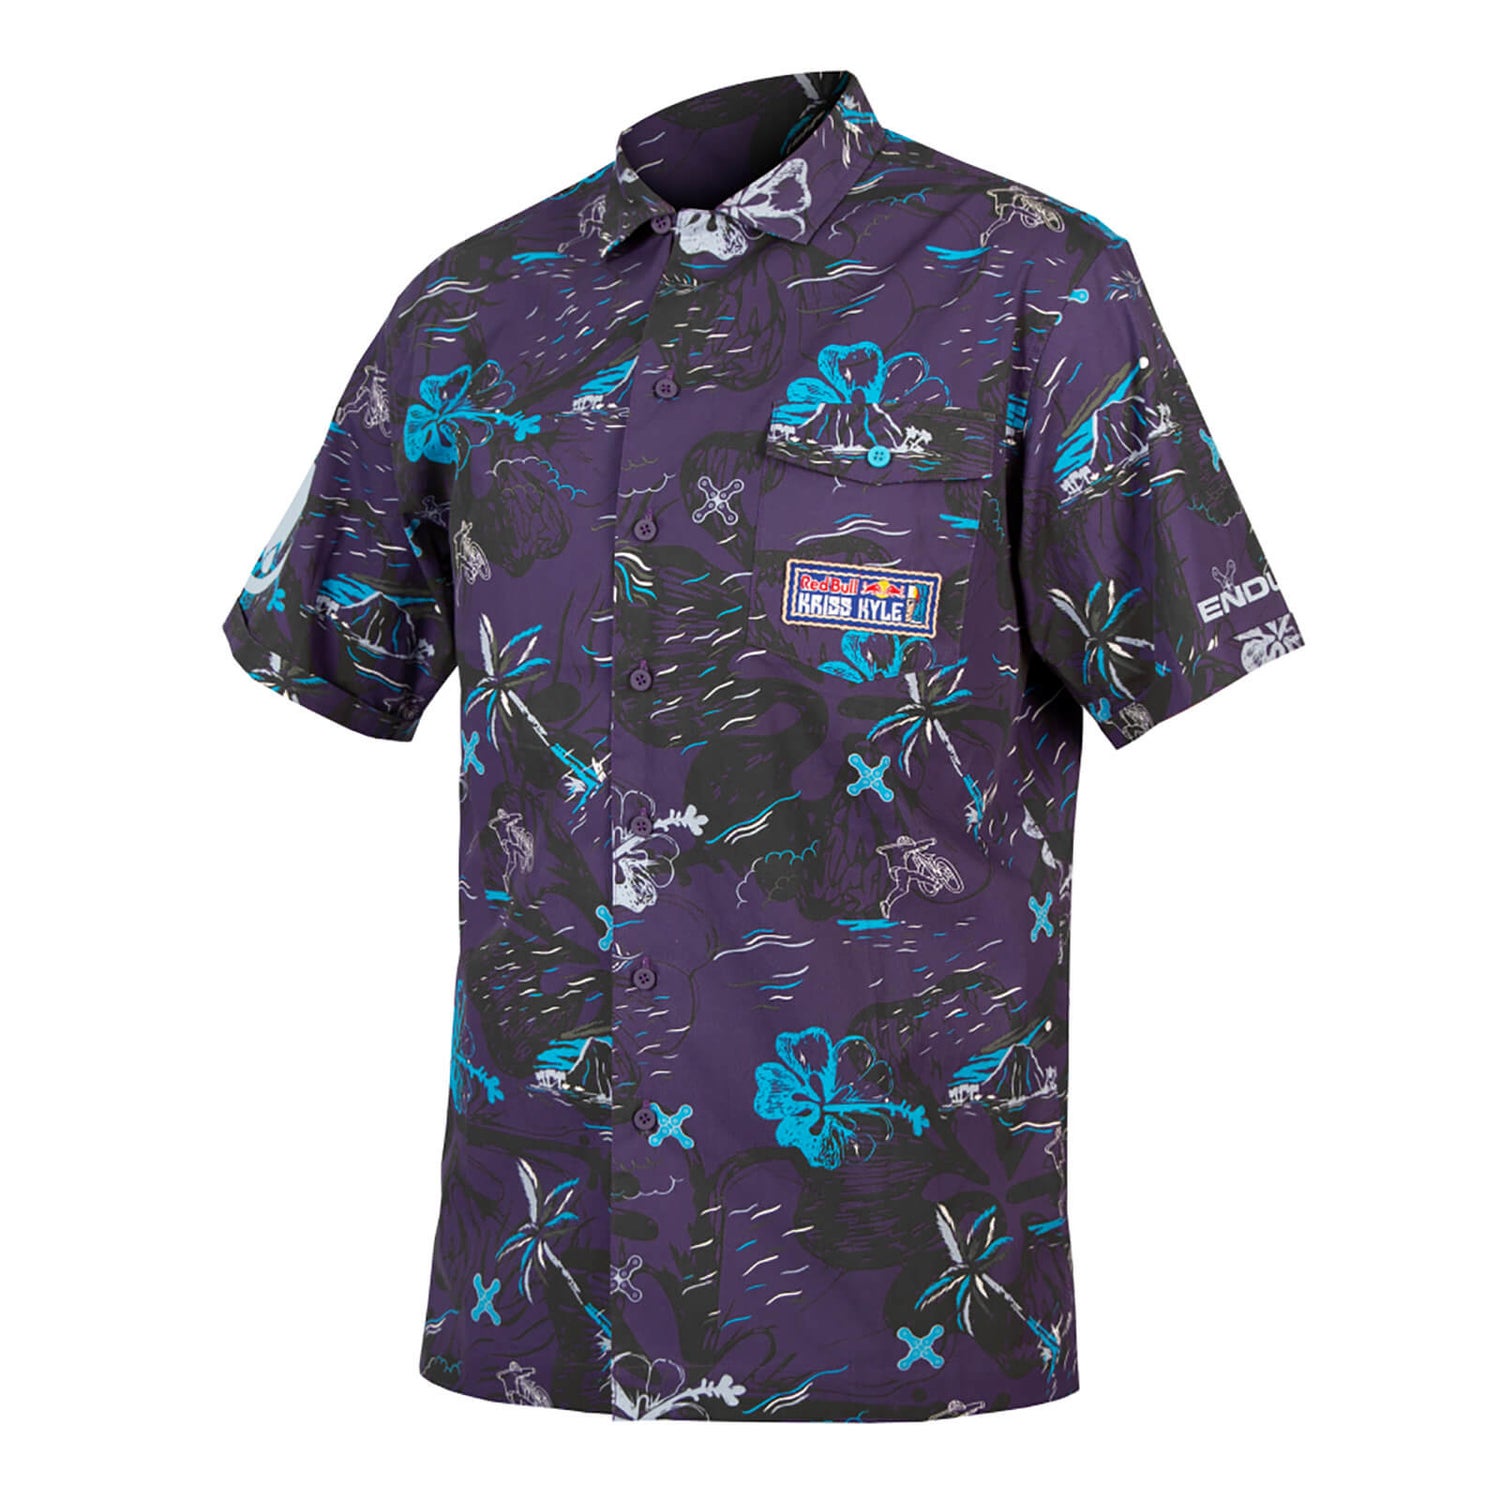 Men's Kriss Kyle x Red Bull Collab Shirt - Camouflage